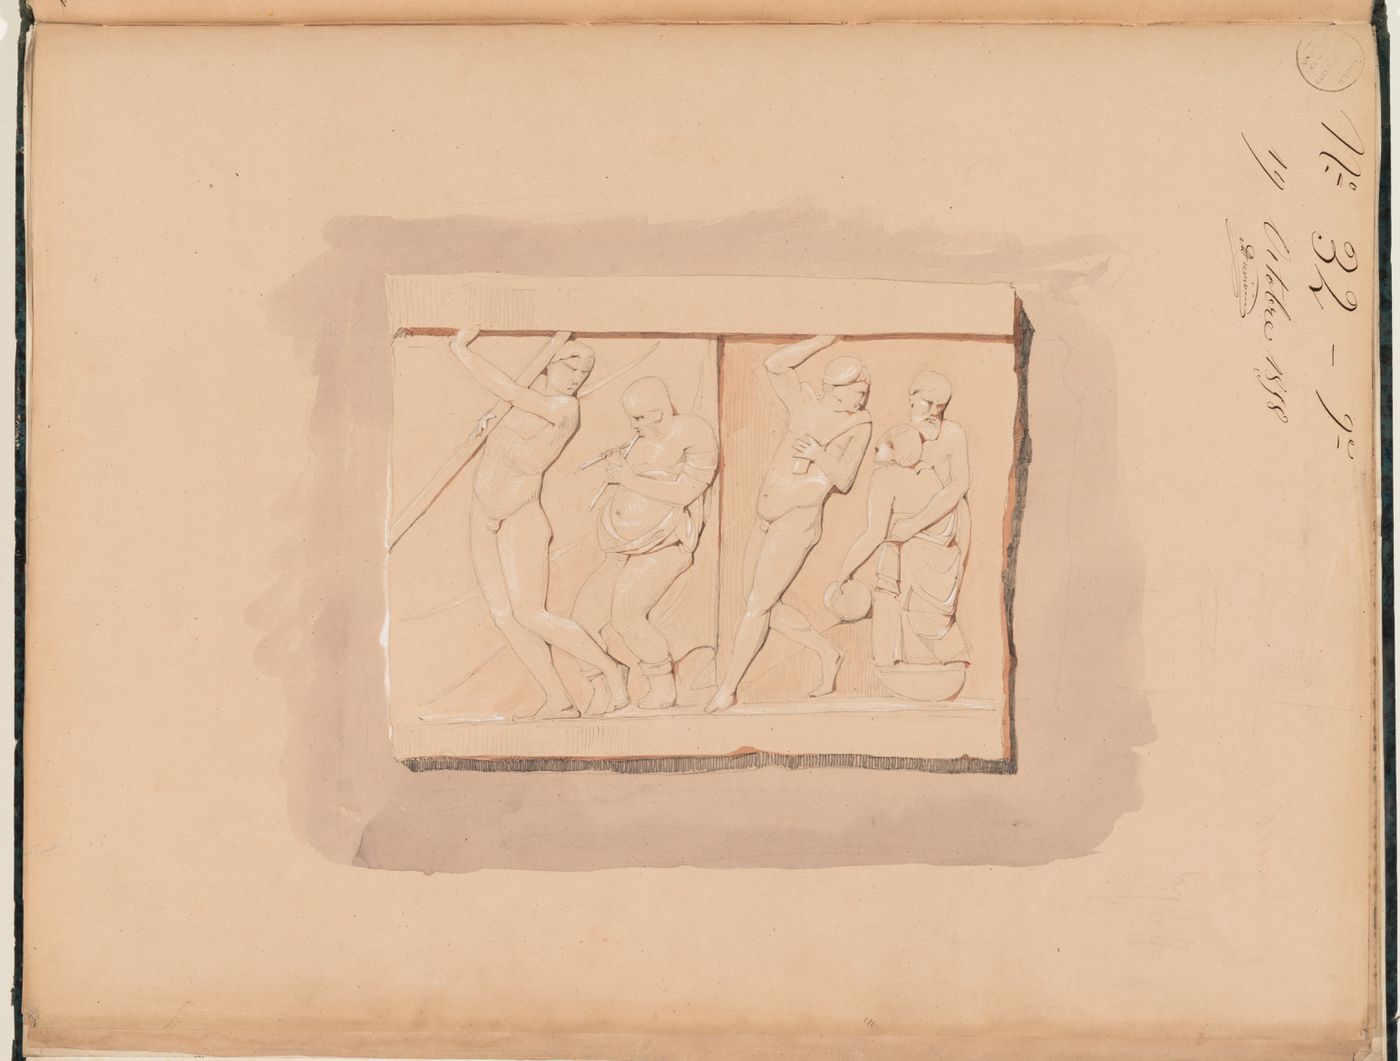 Concours d'émulation entry, 19 October 1858: Study of male figures, probably from a metope